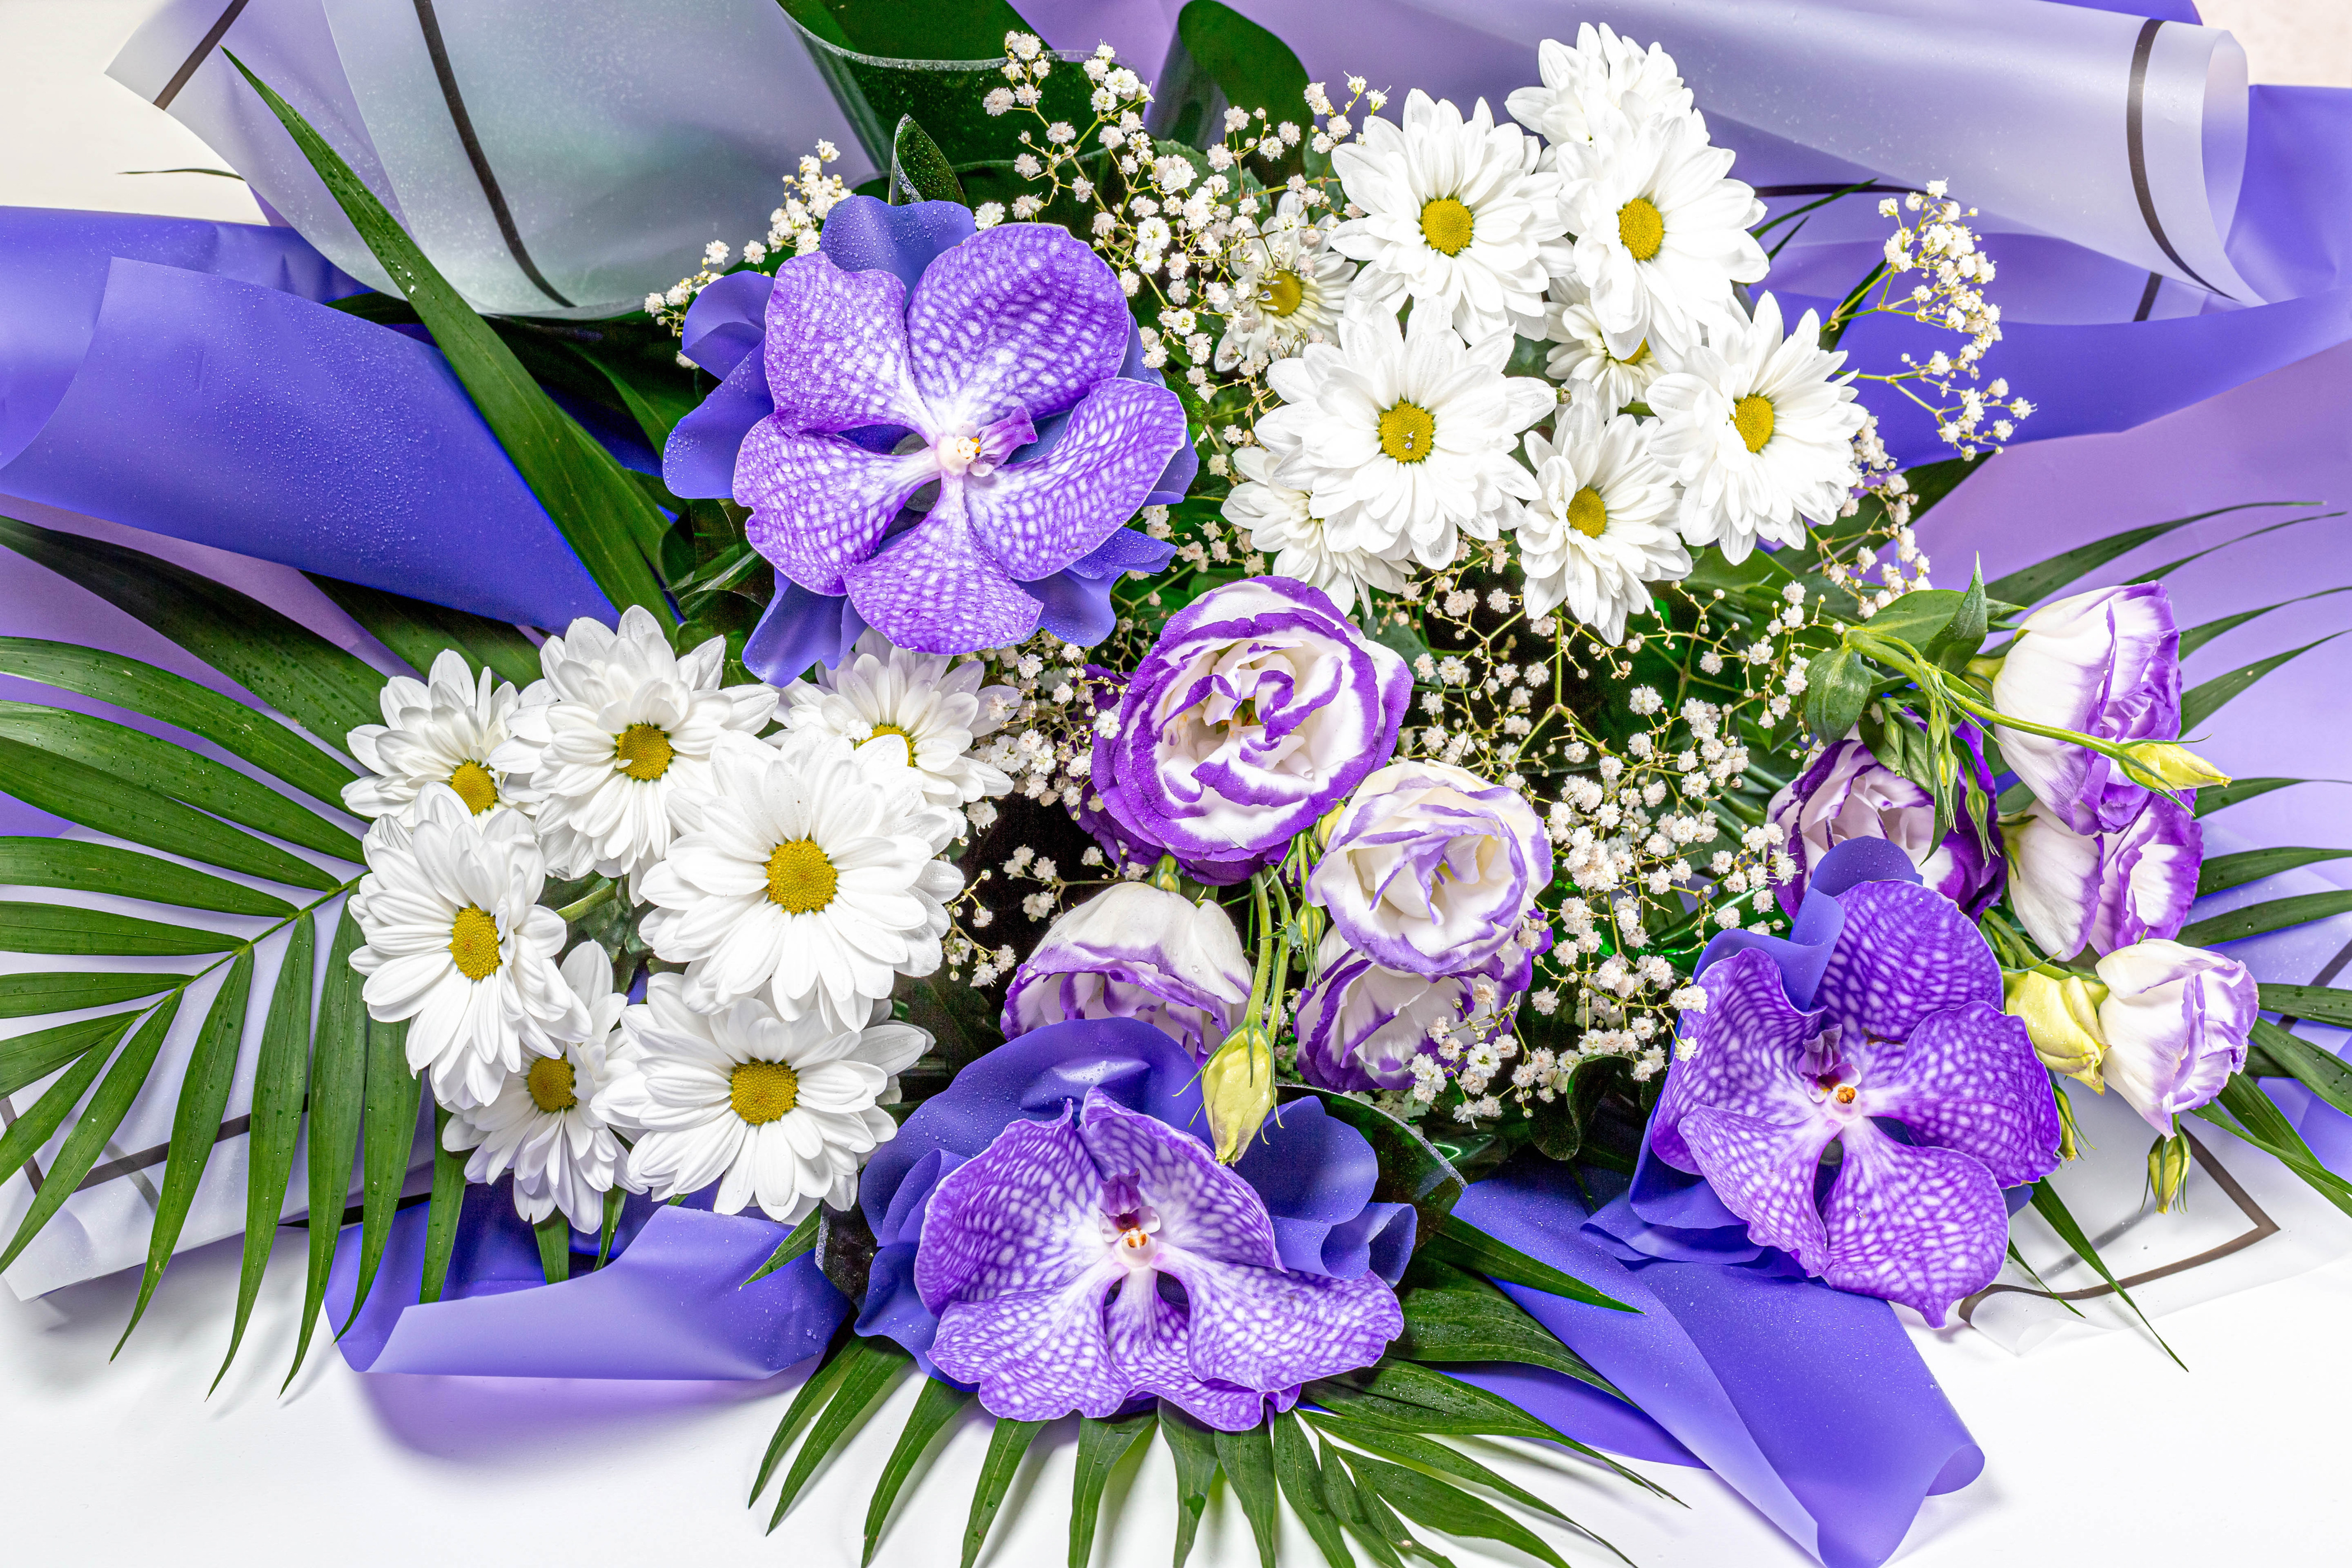 https://on-desktop.com/wps/2020Nature___Flowers_Beautiful_bouquet_with_orchid__chrysanthemum_and_eustoma_flowers_140334_.jpg